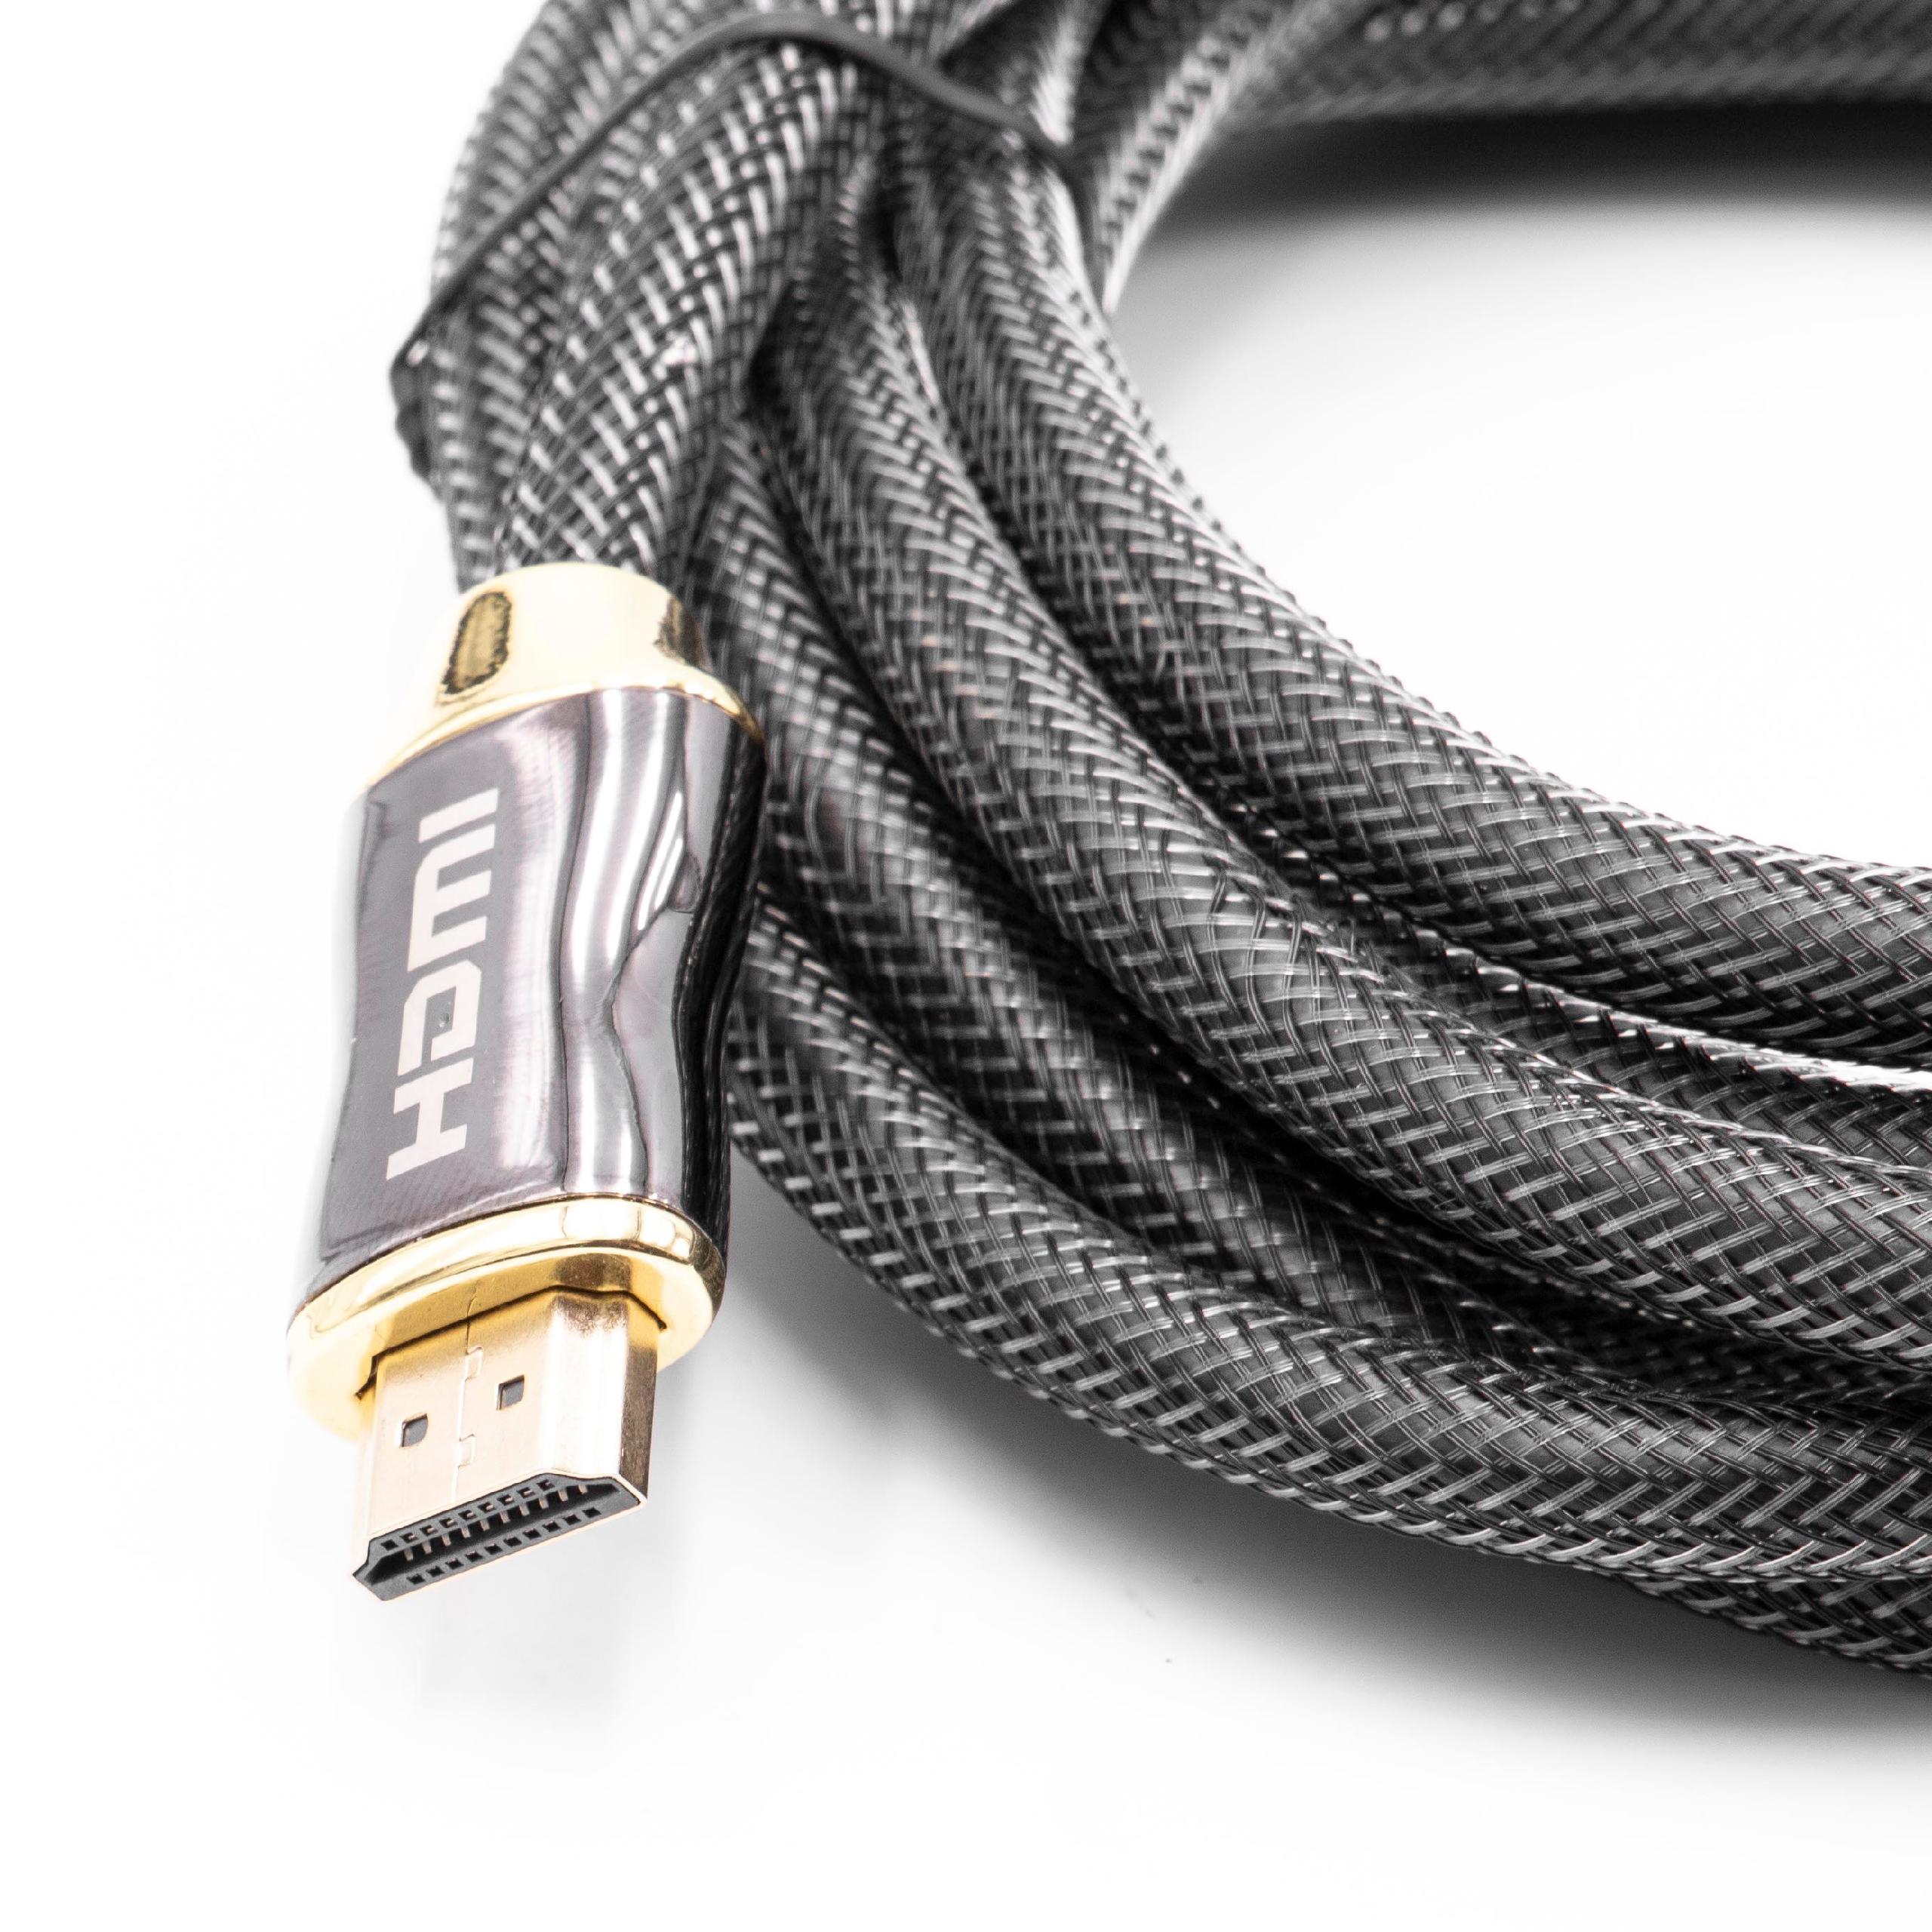 HDMI Cable Premium V2.0 Ultra HD TV braided 3mfor Tablet, TV, Television, Playstation, Computer, Monitor, DVD 